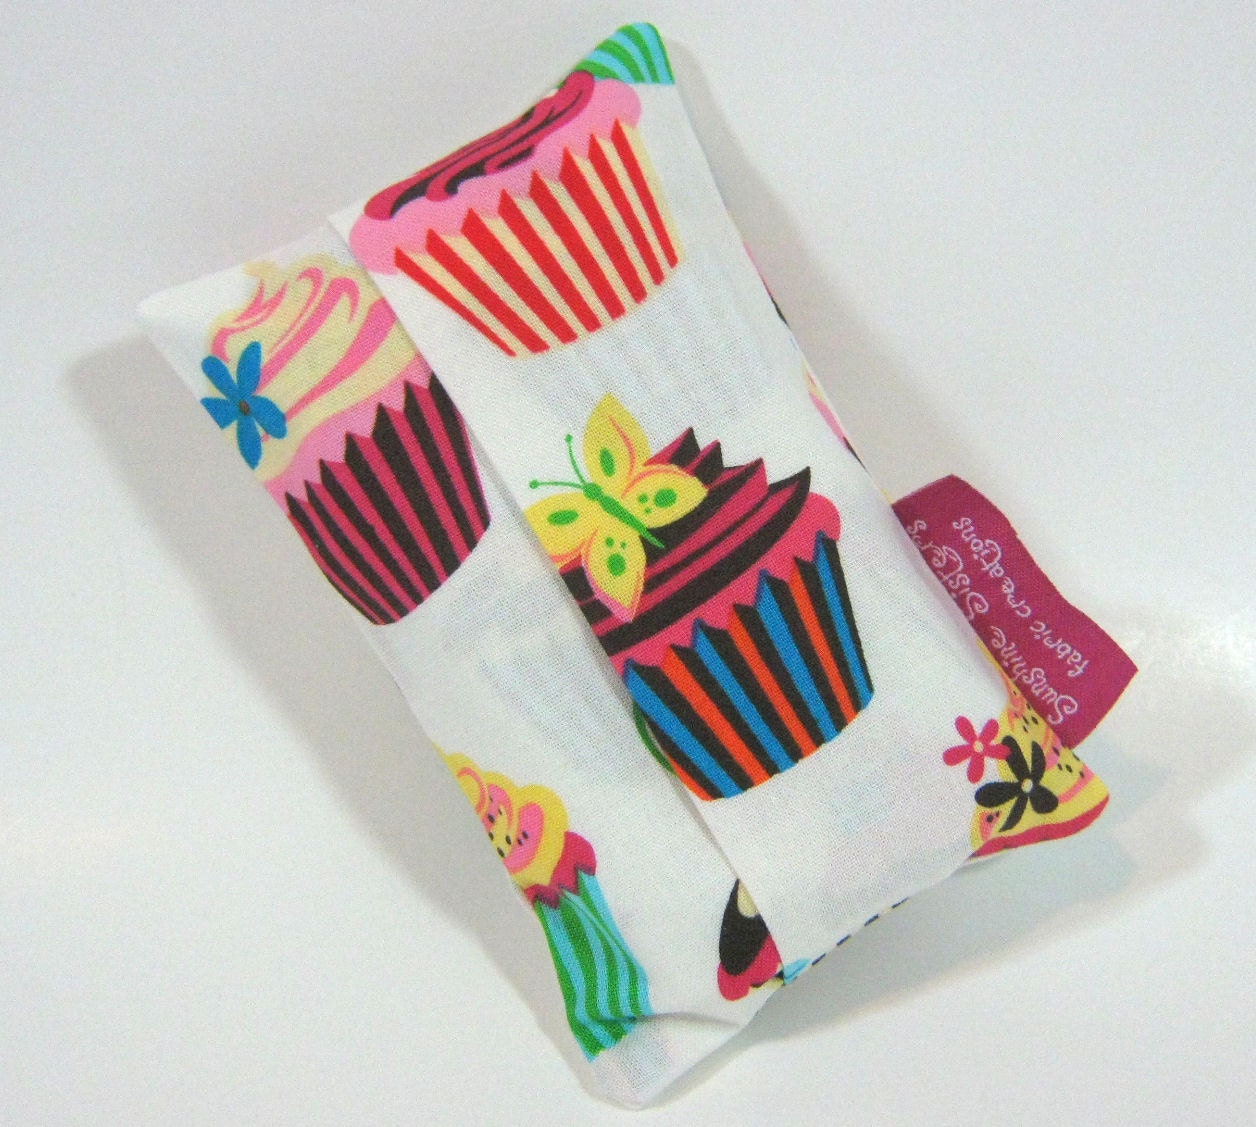 Cupcake Tissue Pouch- Travel Tissue Case using Robert Kaufman's Sweet Tooth Cupcake Fabric